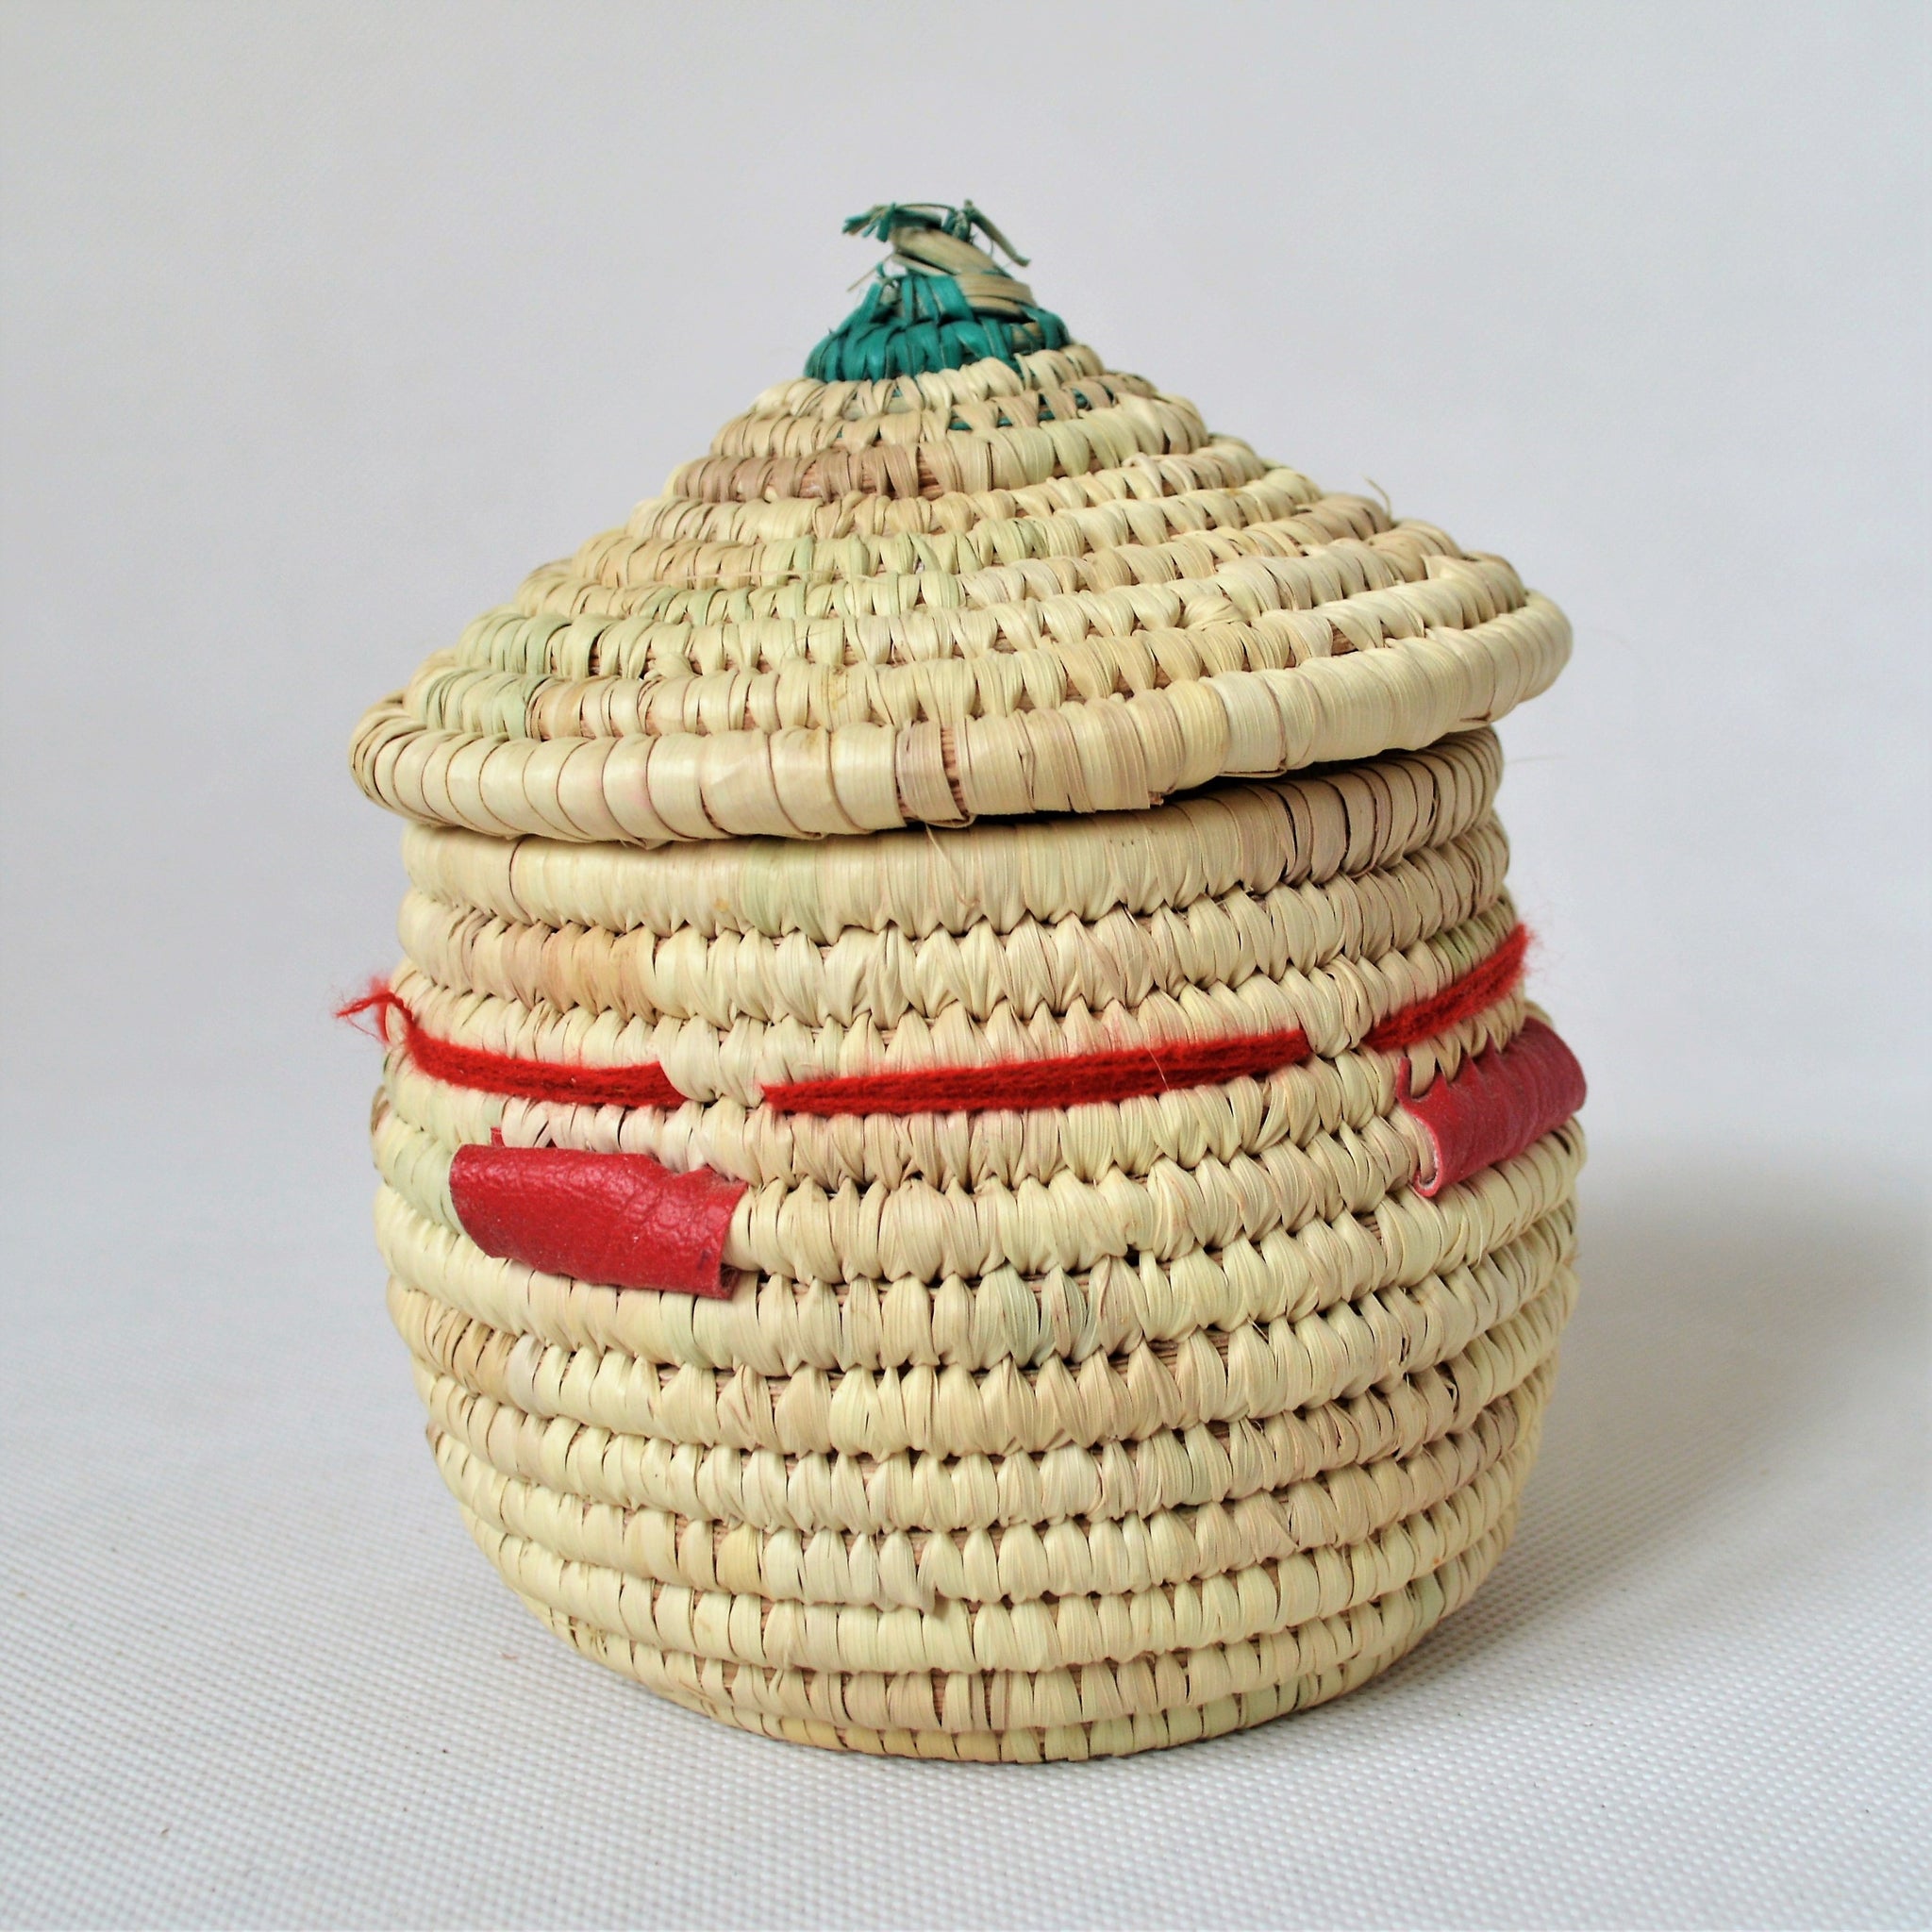 Woven African basket with a fitted lid